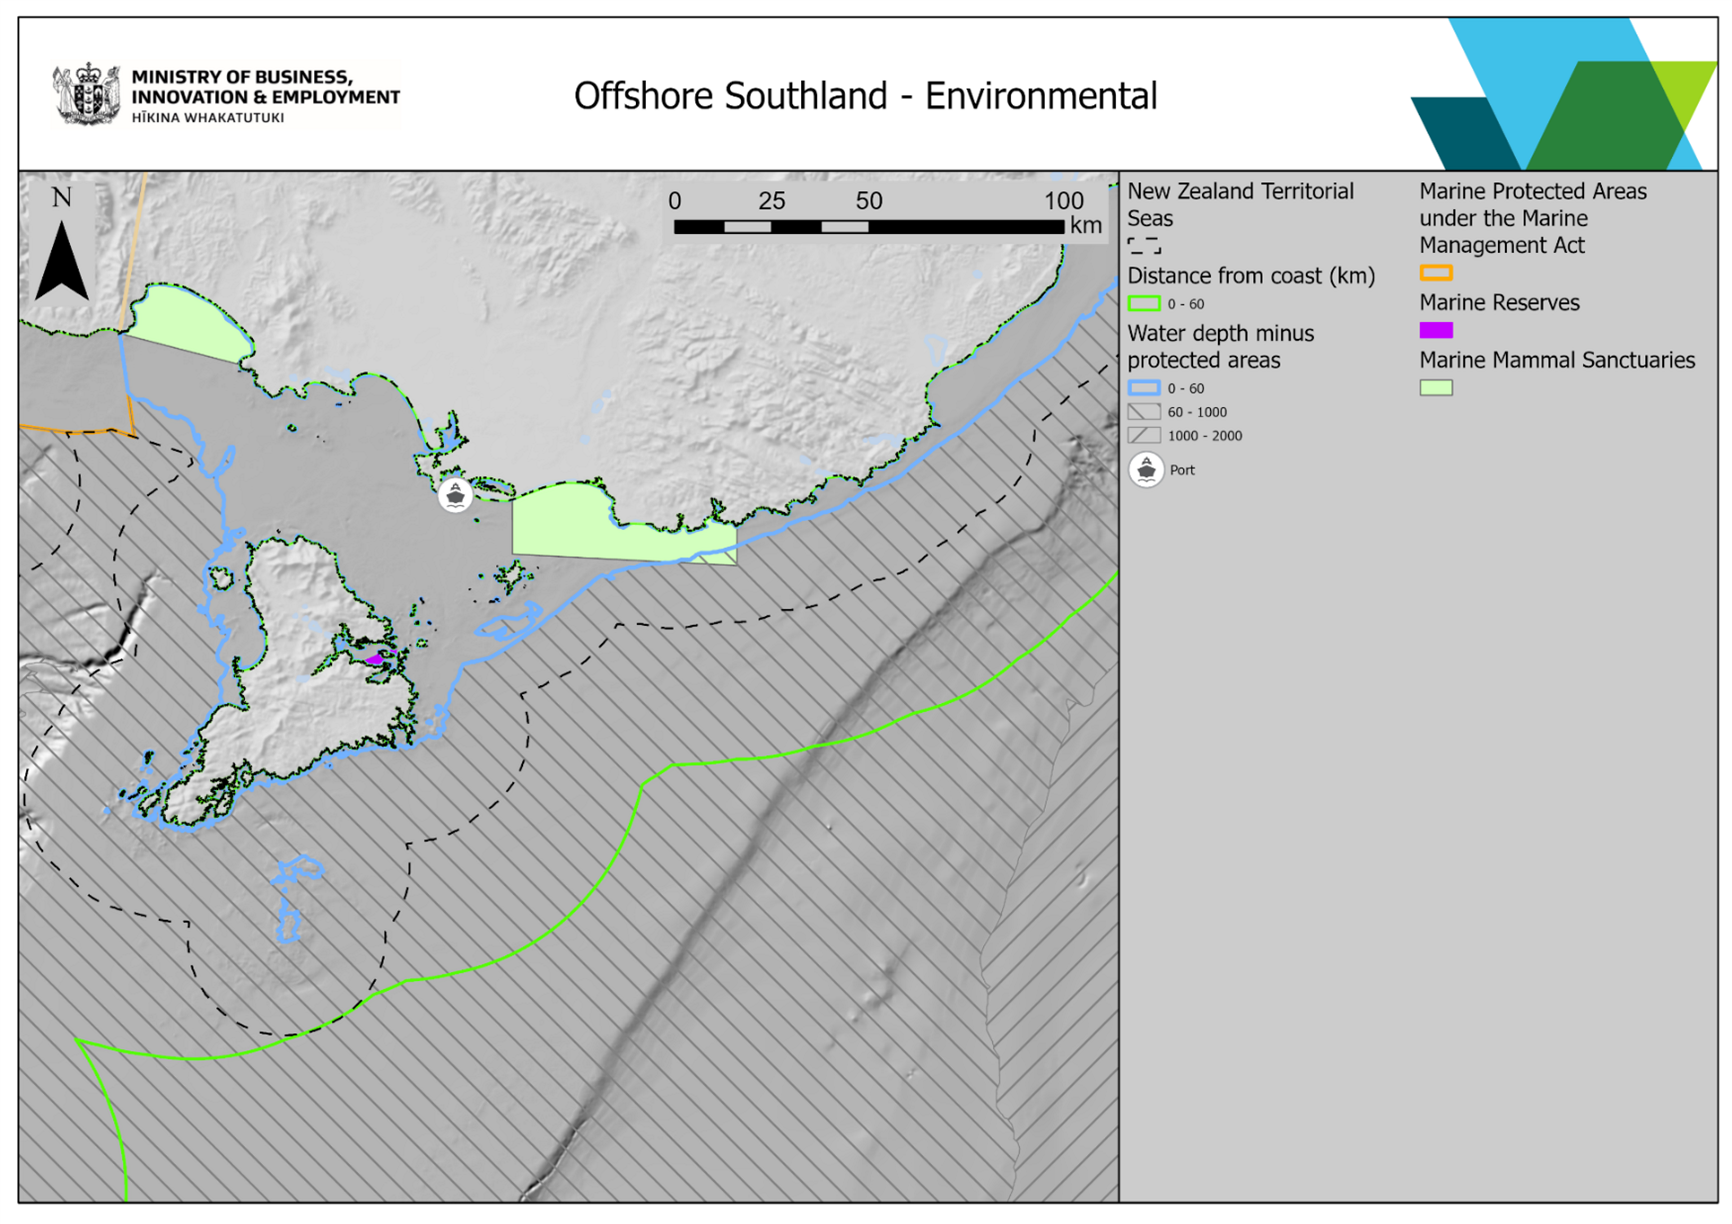 Annex5 offshore southland environmental